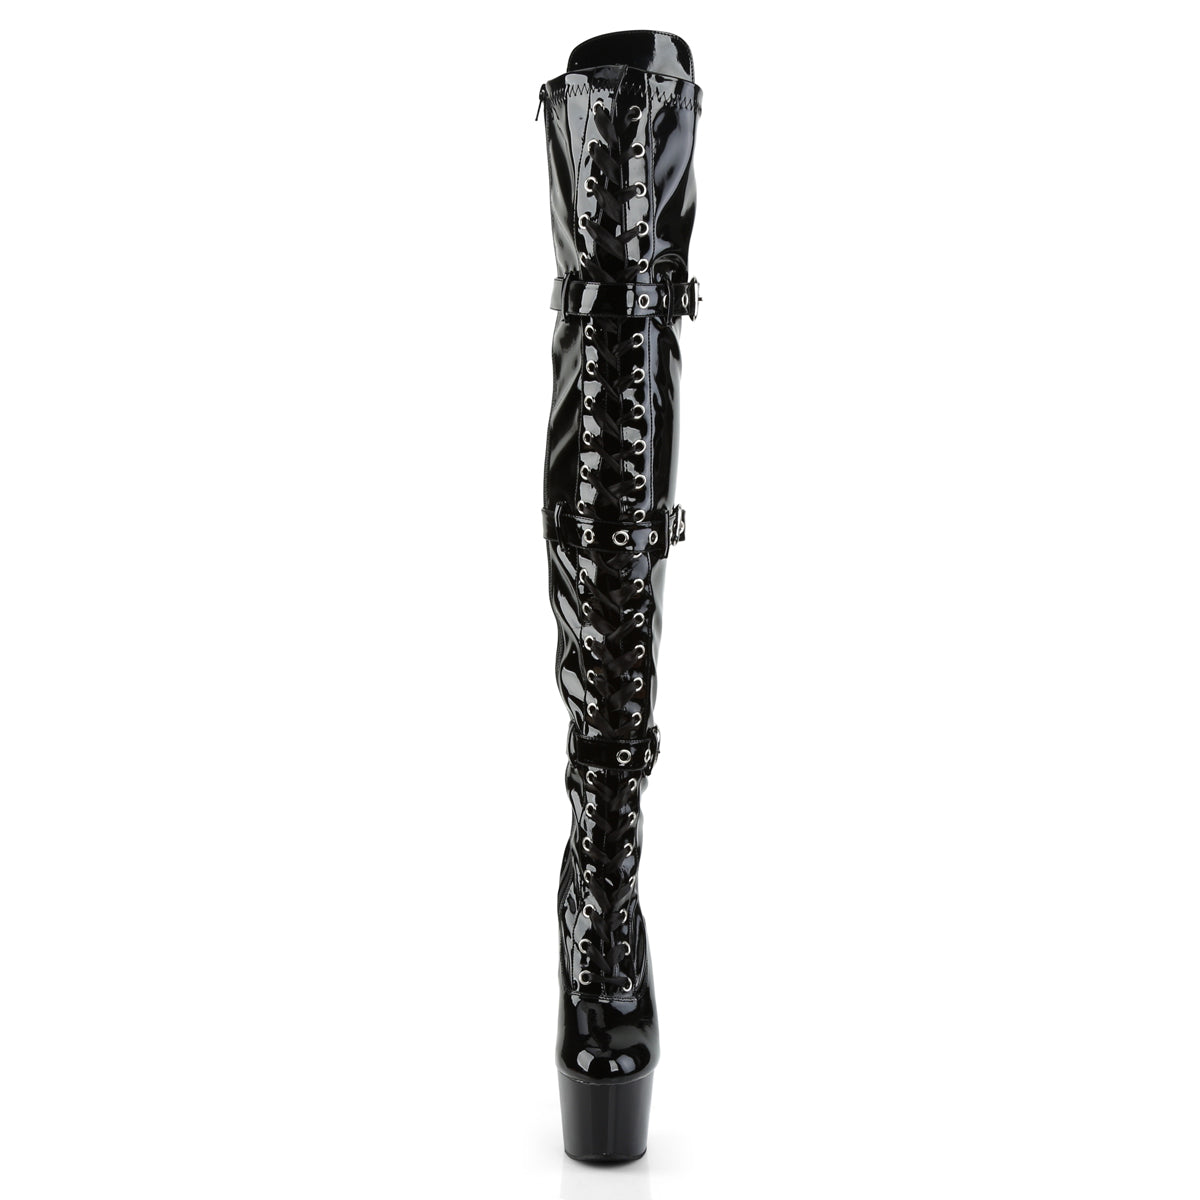 ADORE-3028 Black Patent Thigh Boot Pleaser